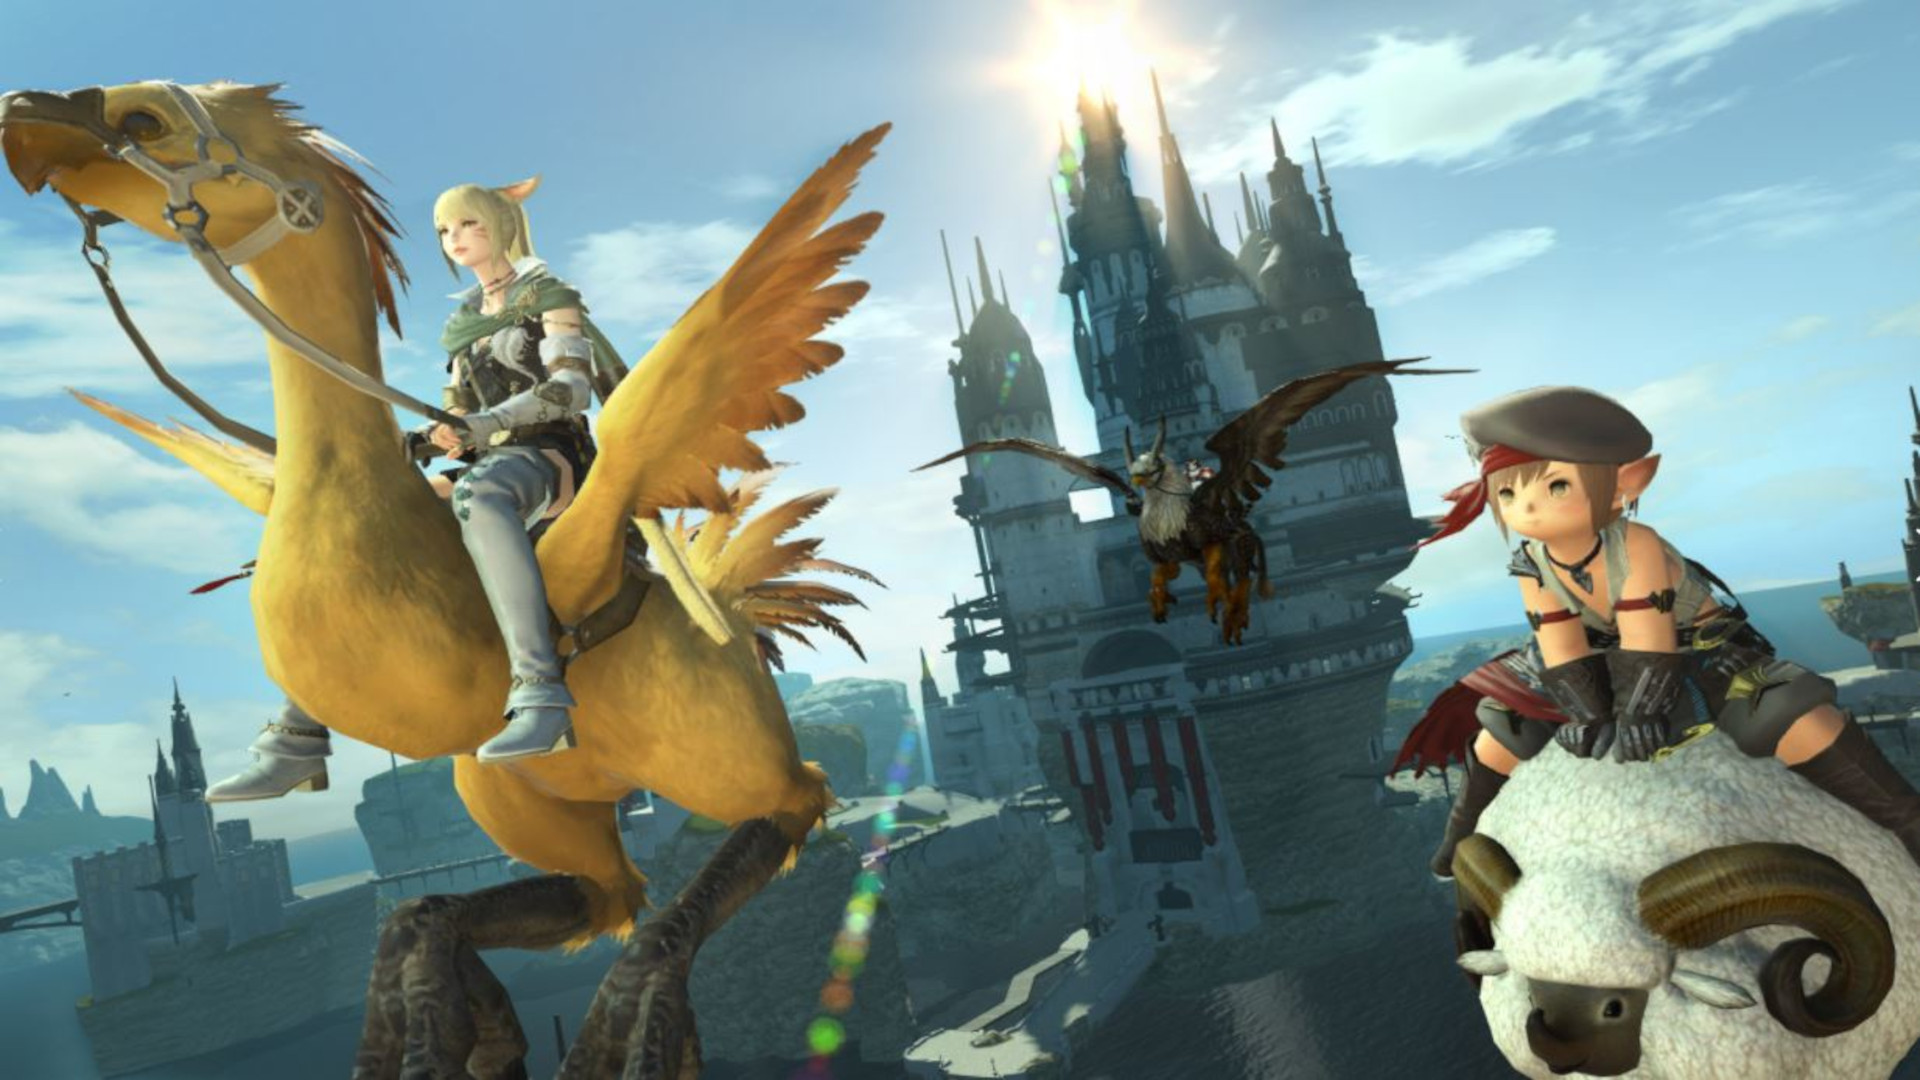 Final Fantasy 14 bans more than 5,000 players for using real money in the game